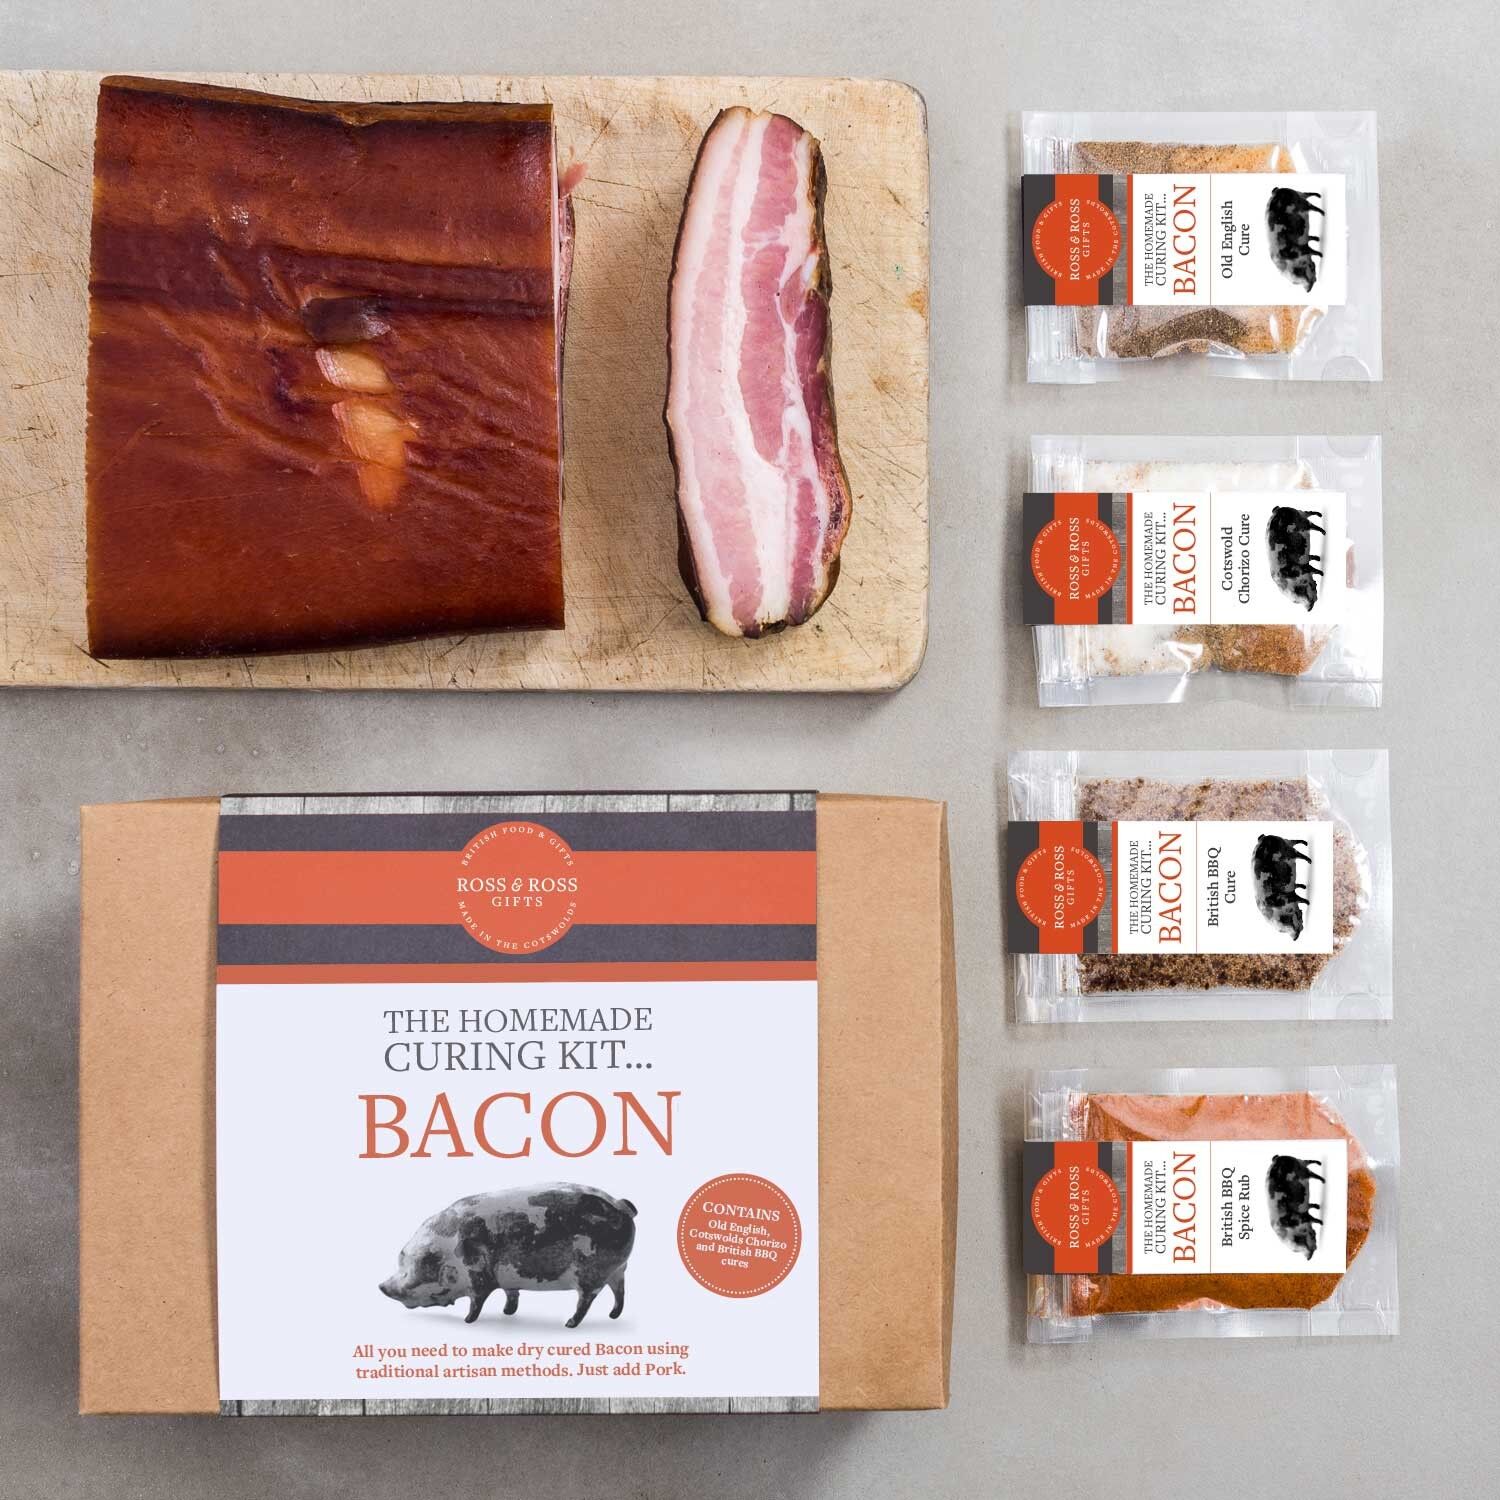 Bacon Bouquets - Time to get your first aid kit. Just in case #newyearseve  gets wild. #bacon #survivalkit | Facebook